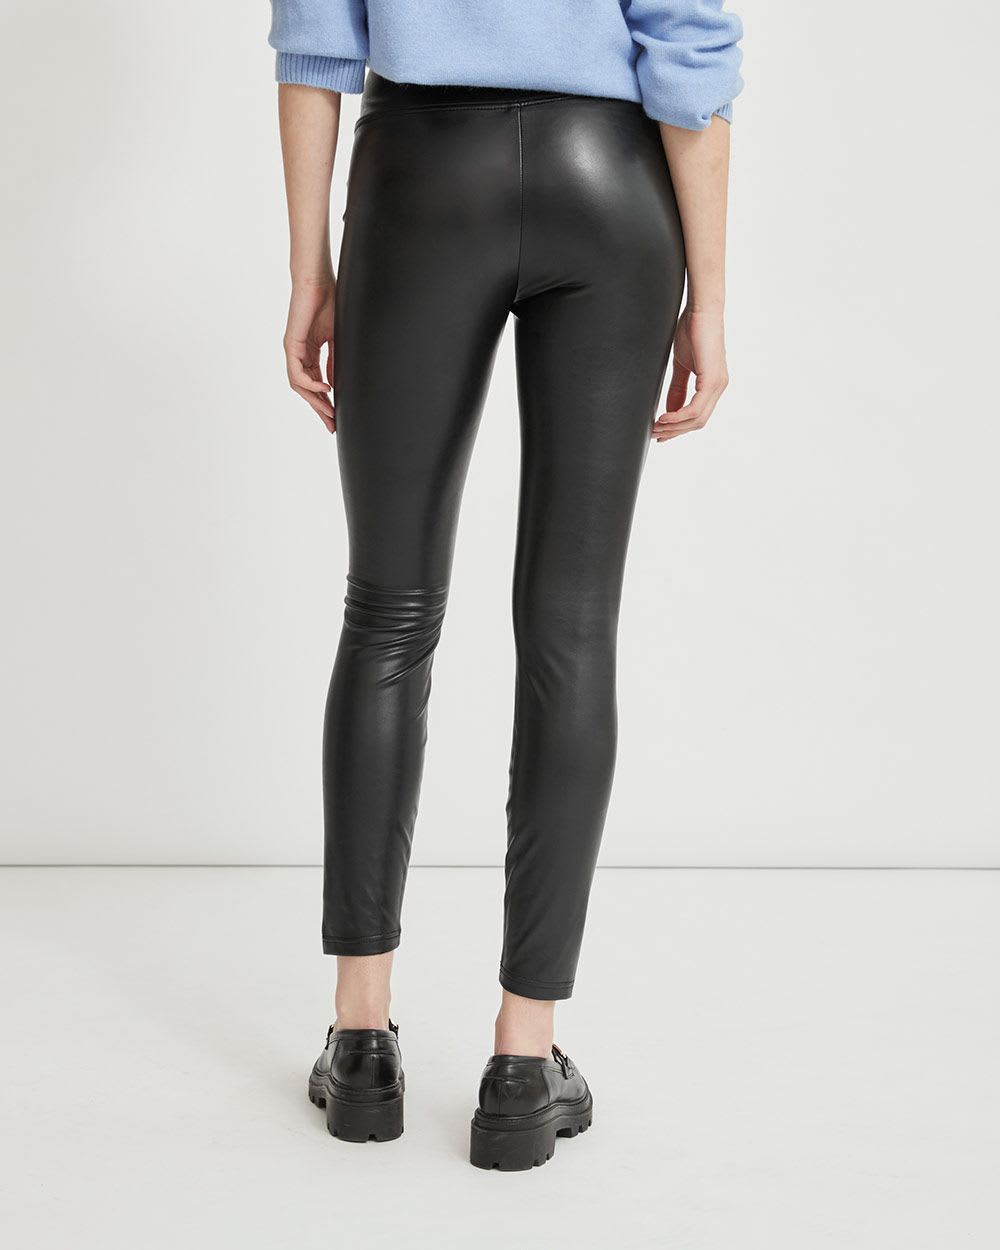 Stretch Faux Leather Legging Pant